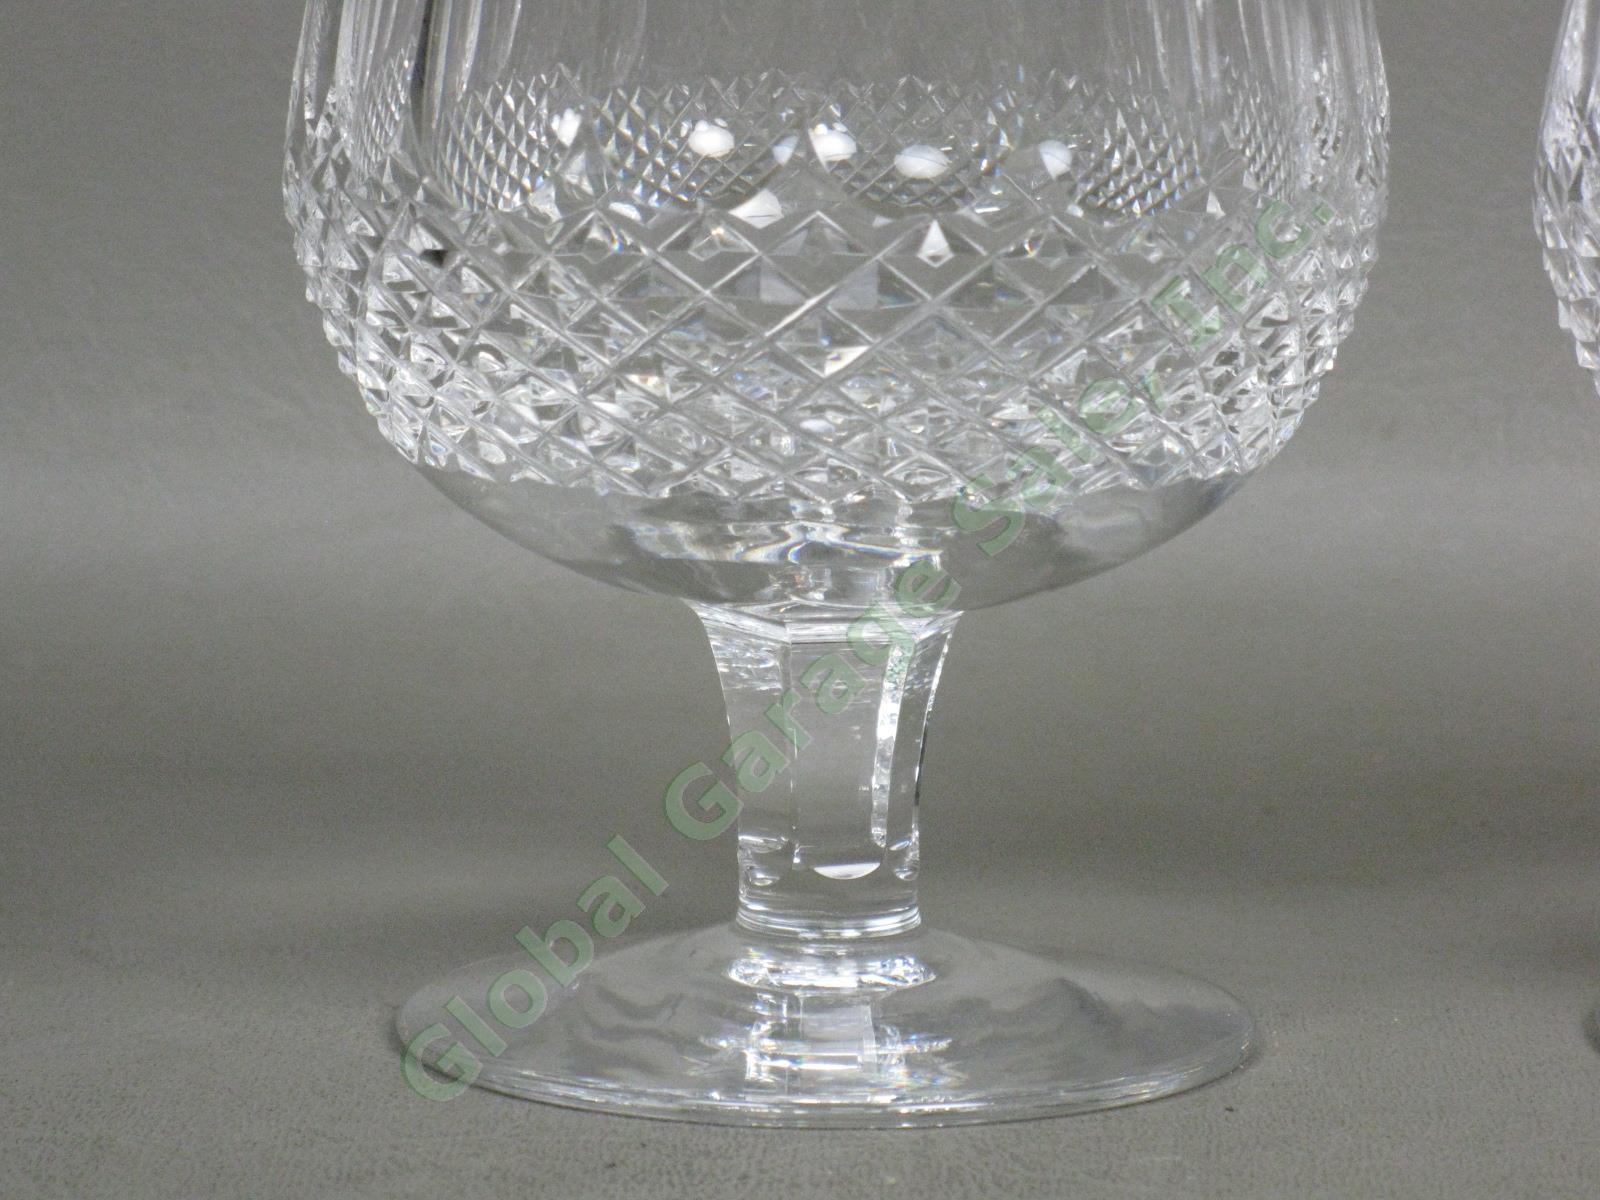 2 Waterford Cut Lead Crystal Colleen Brandy Snifter Glasses Pair Set Lot 5-1/8" 2